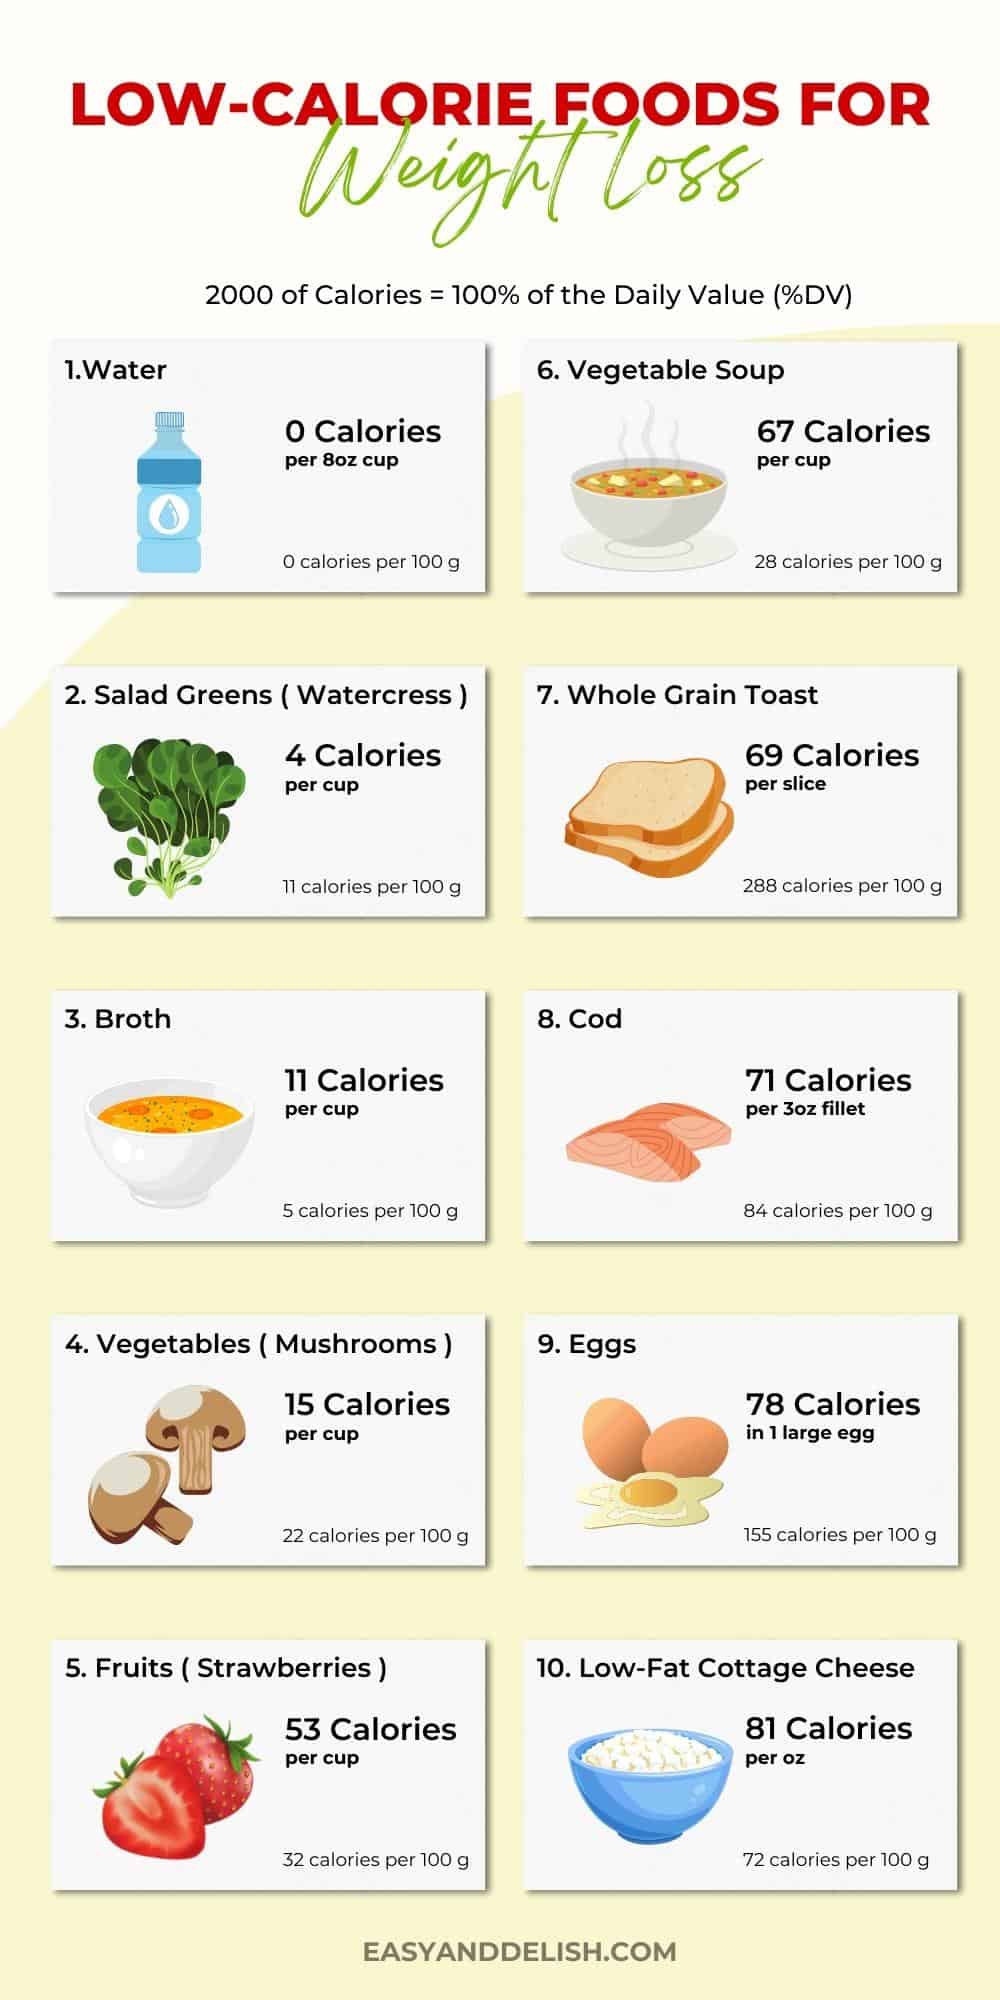 Low-fat weight control